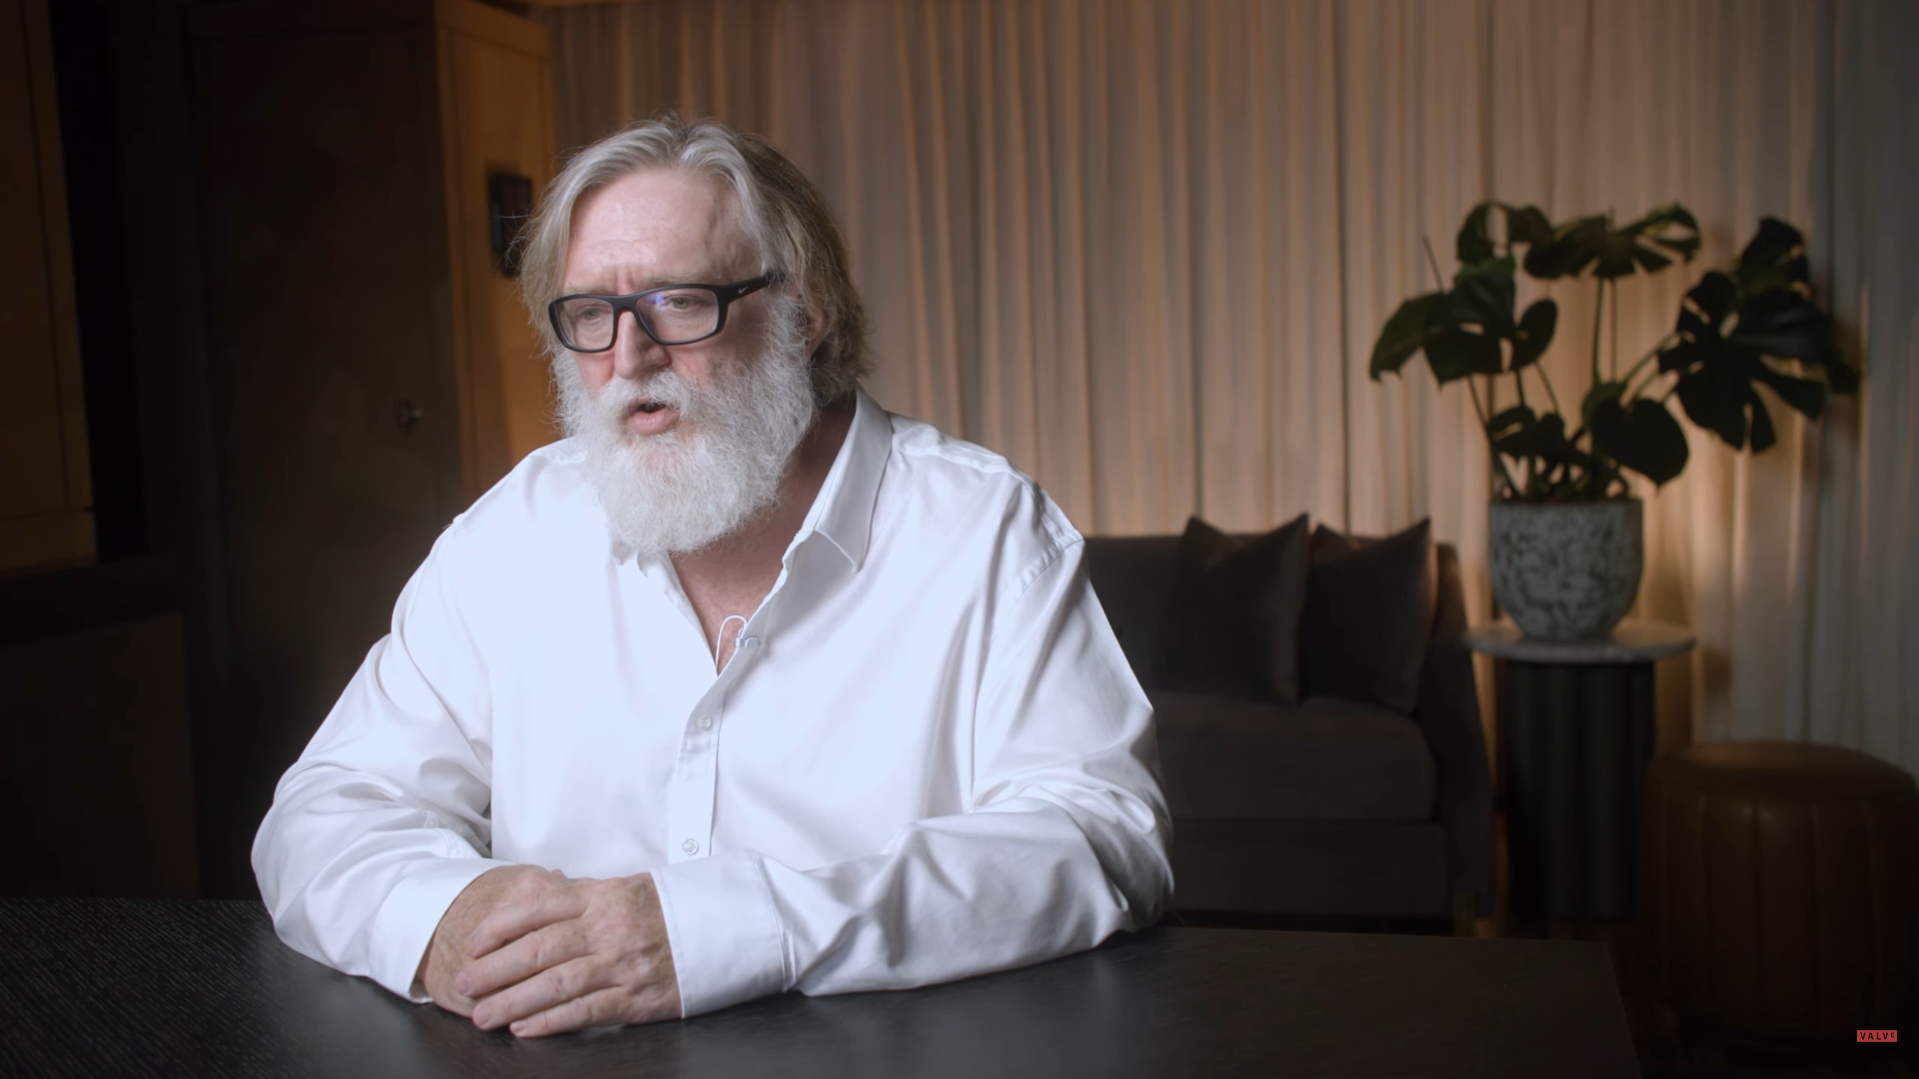 Gabe Newell Ordered to make In-Person Deposition in Antitrust Lawsuit